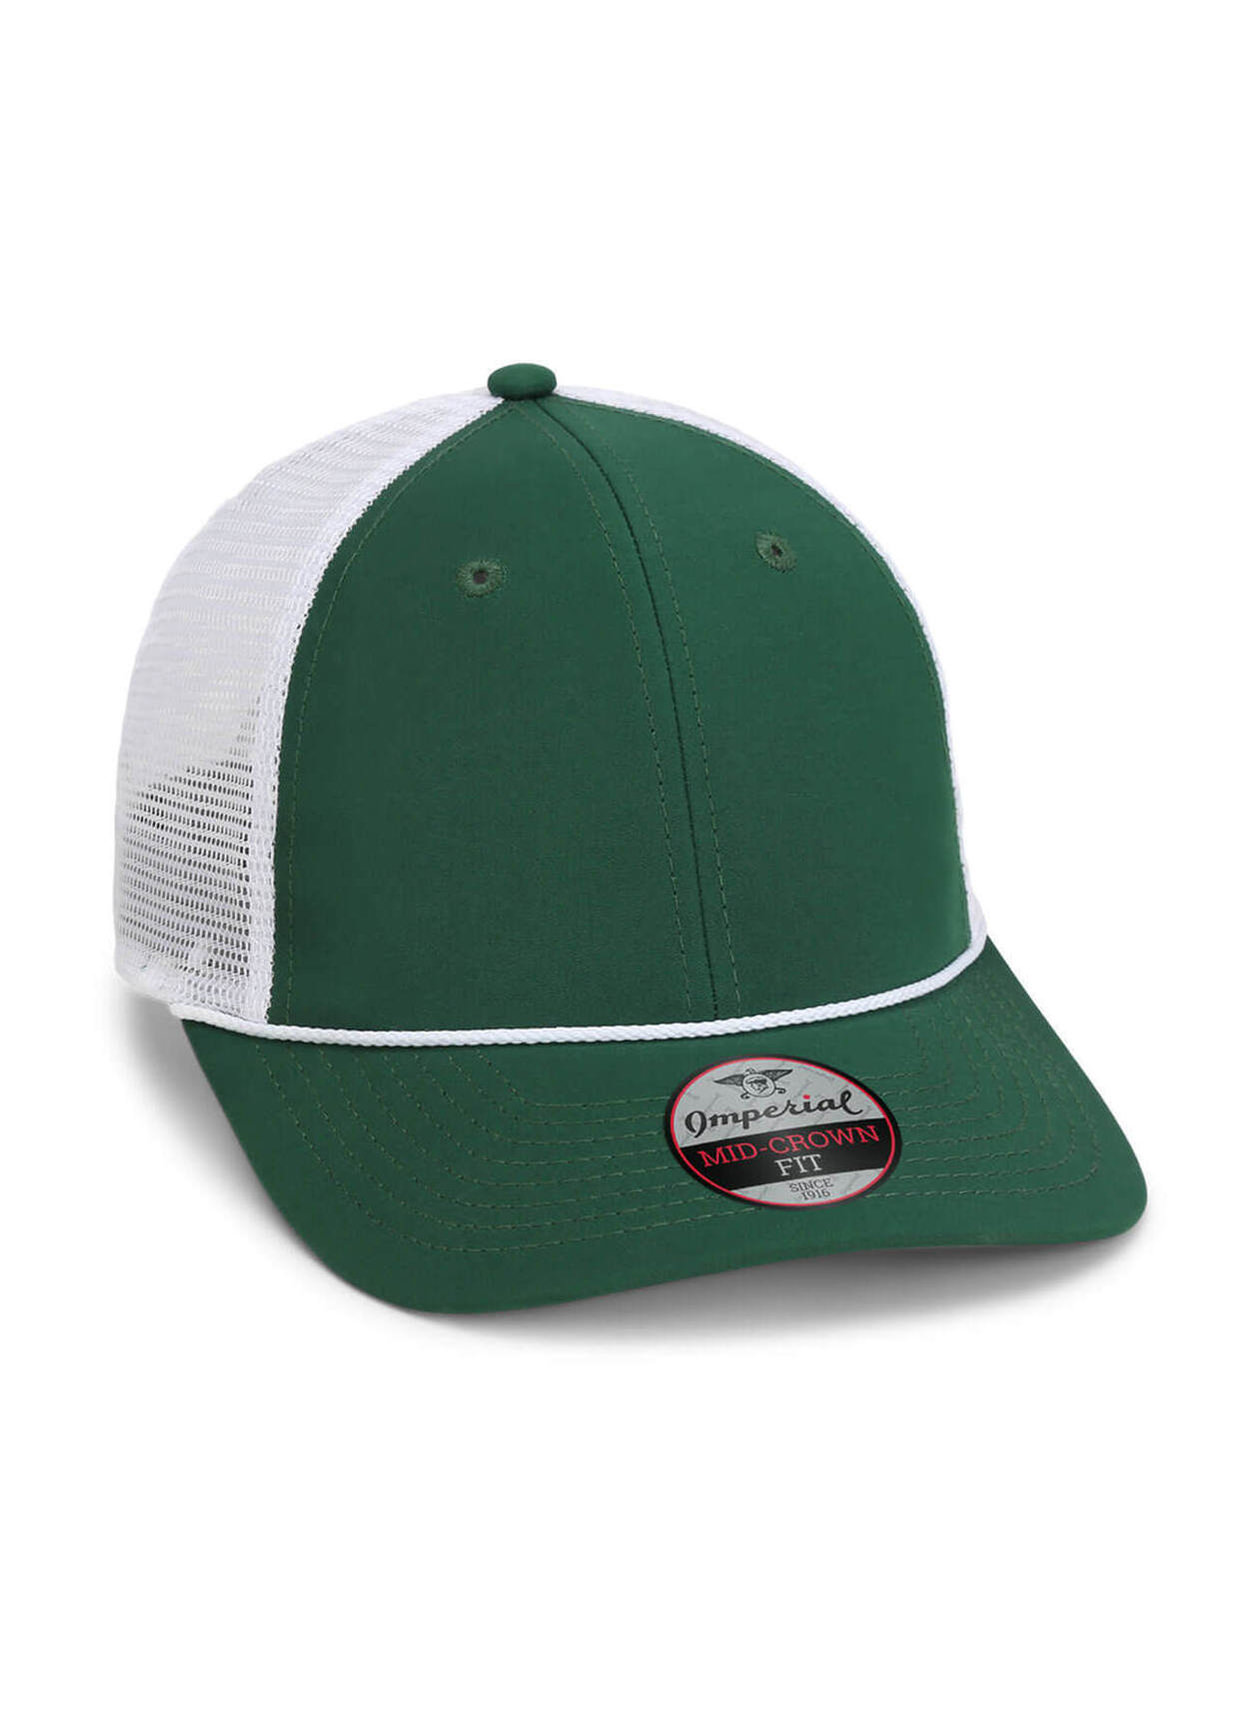 Imperial Forest Green / White The Night Owl Mesh Back Performance Hat